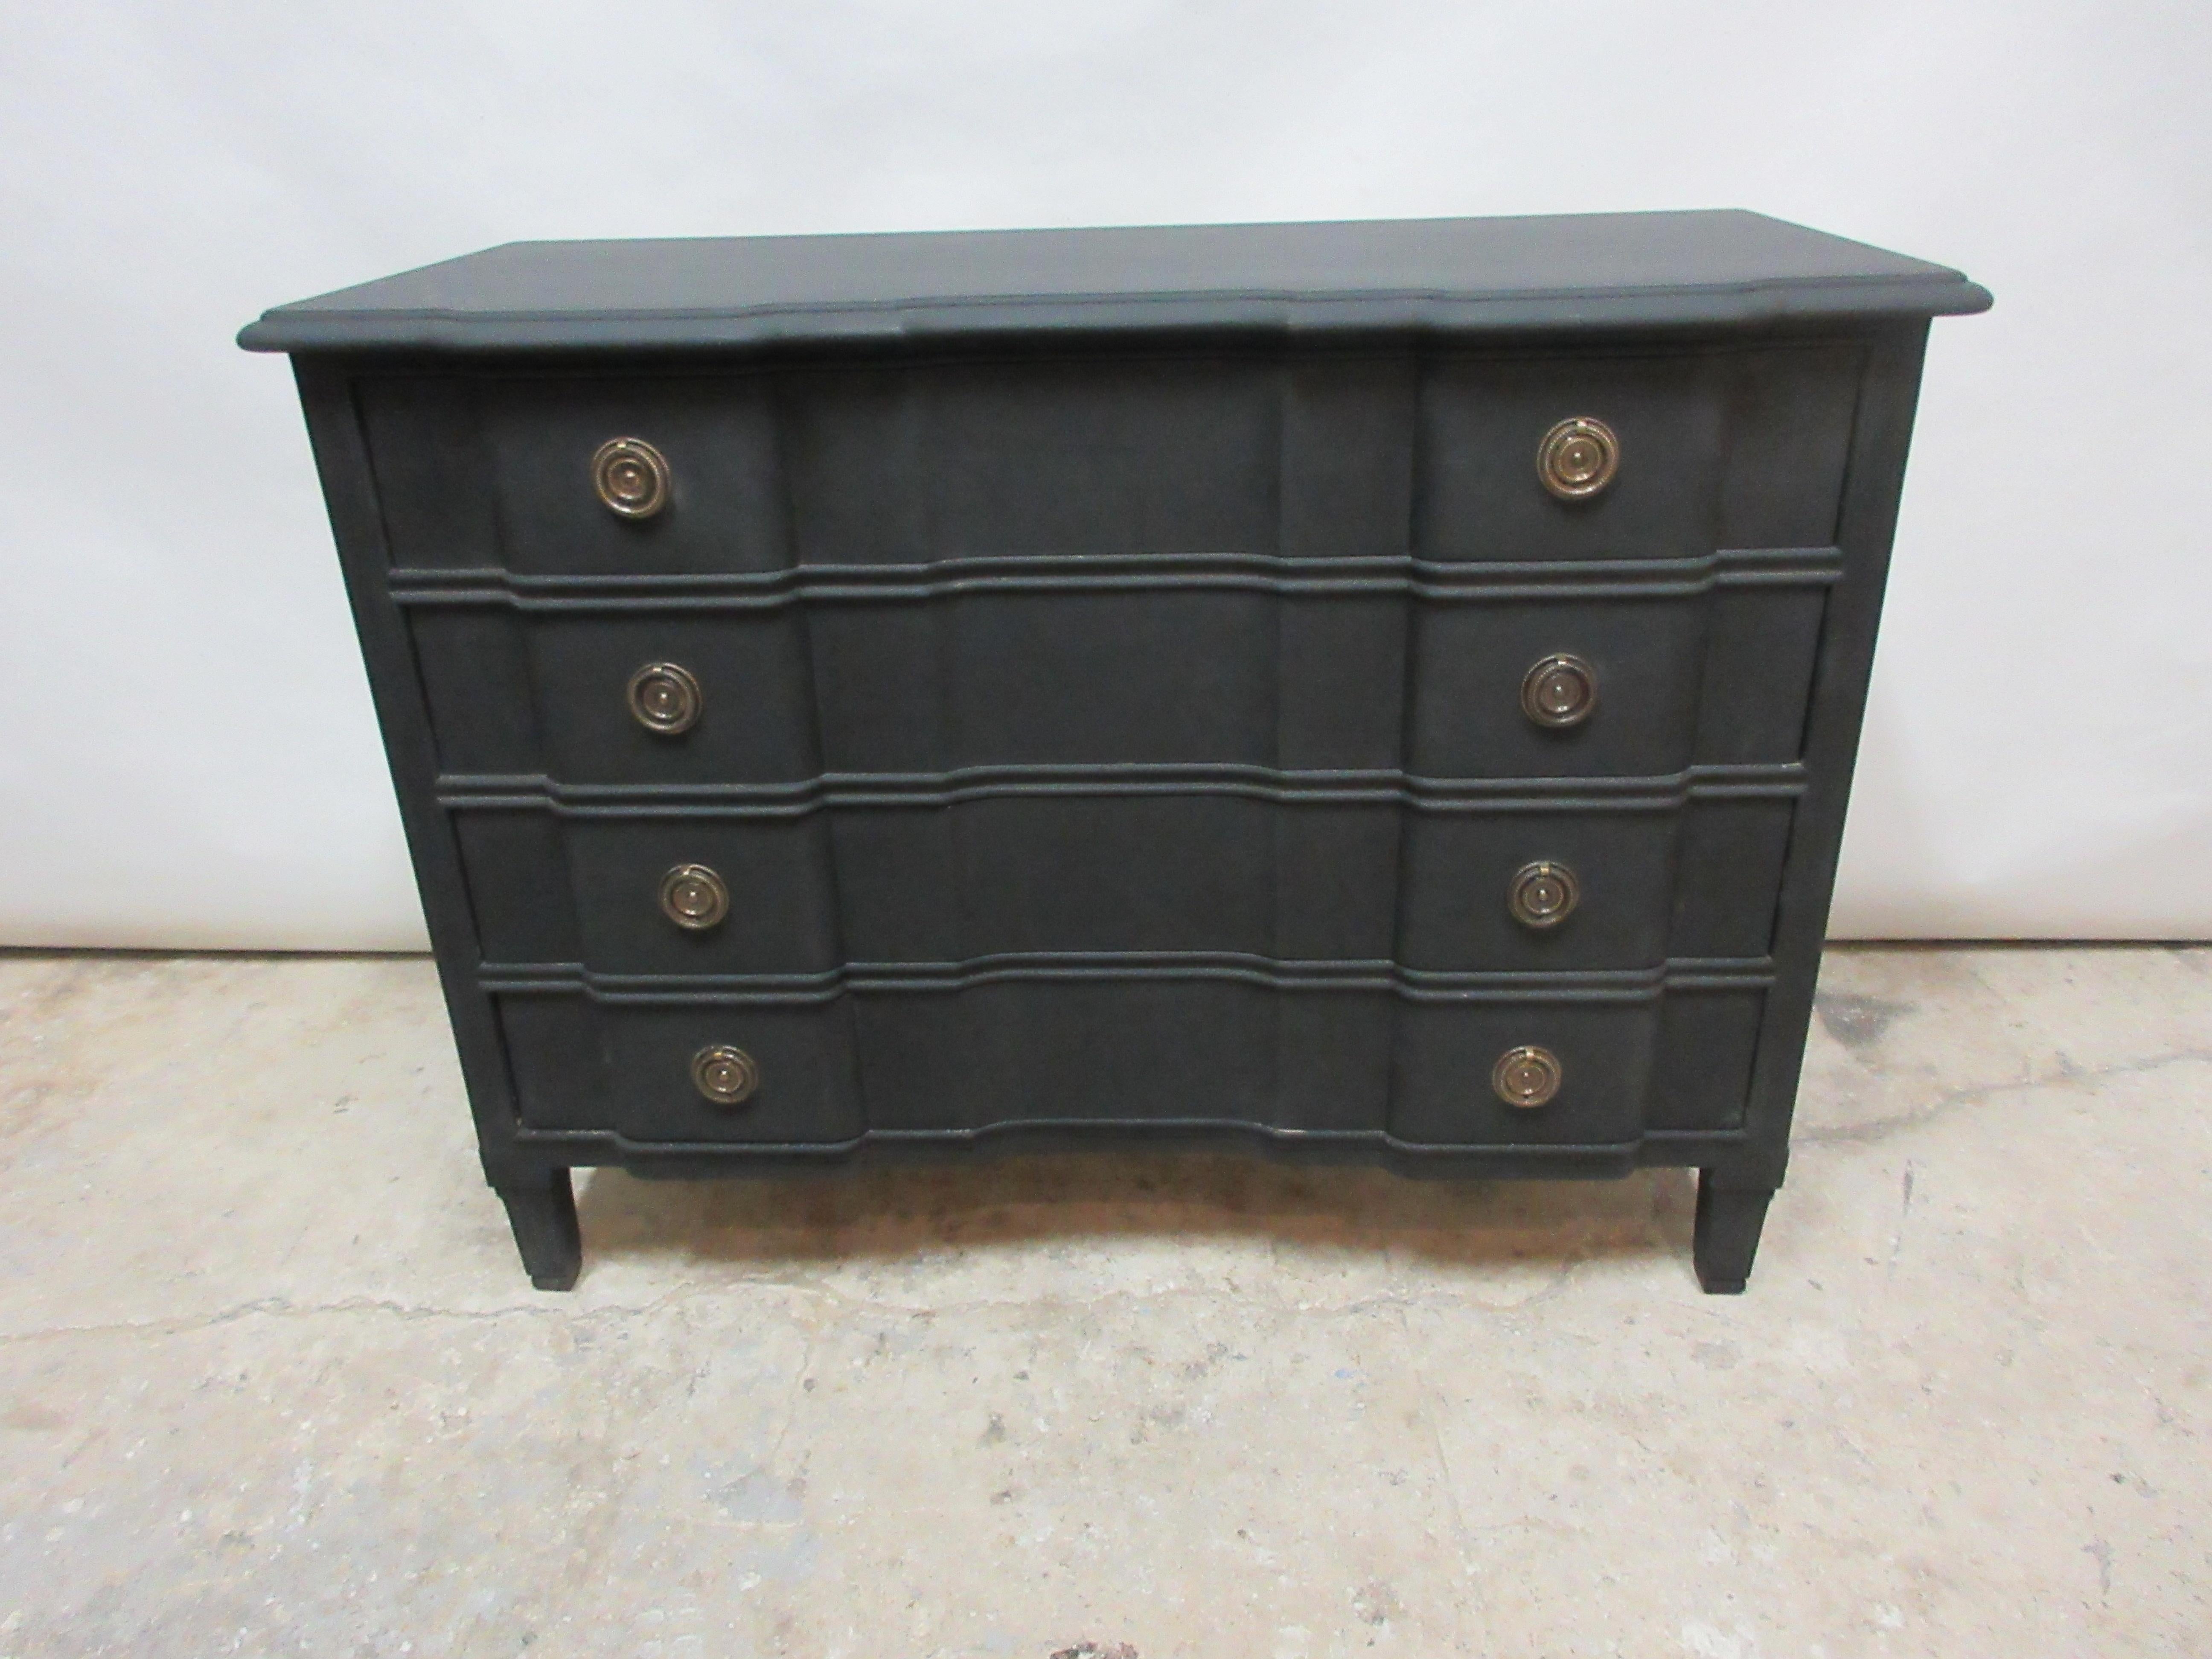 This is a midnight black Gustavian Style chest, it has been restored and repainted with milk paints 